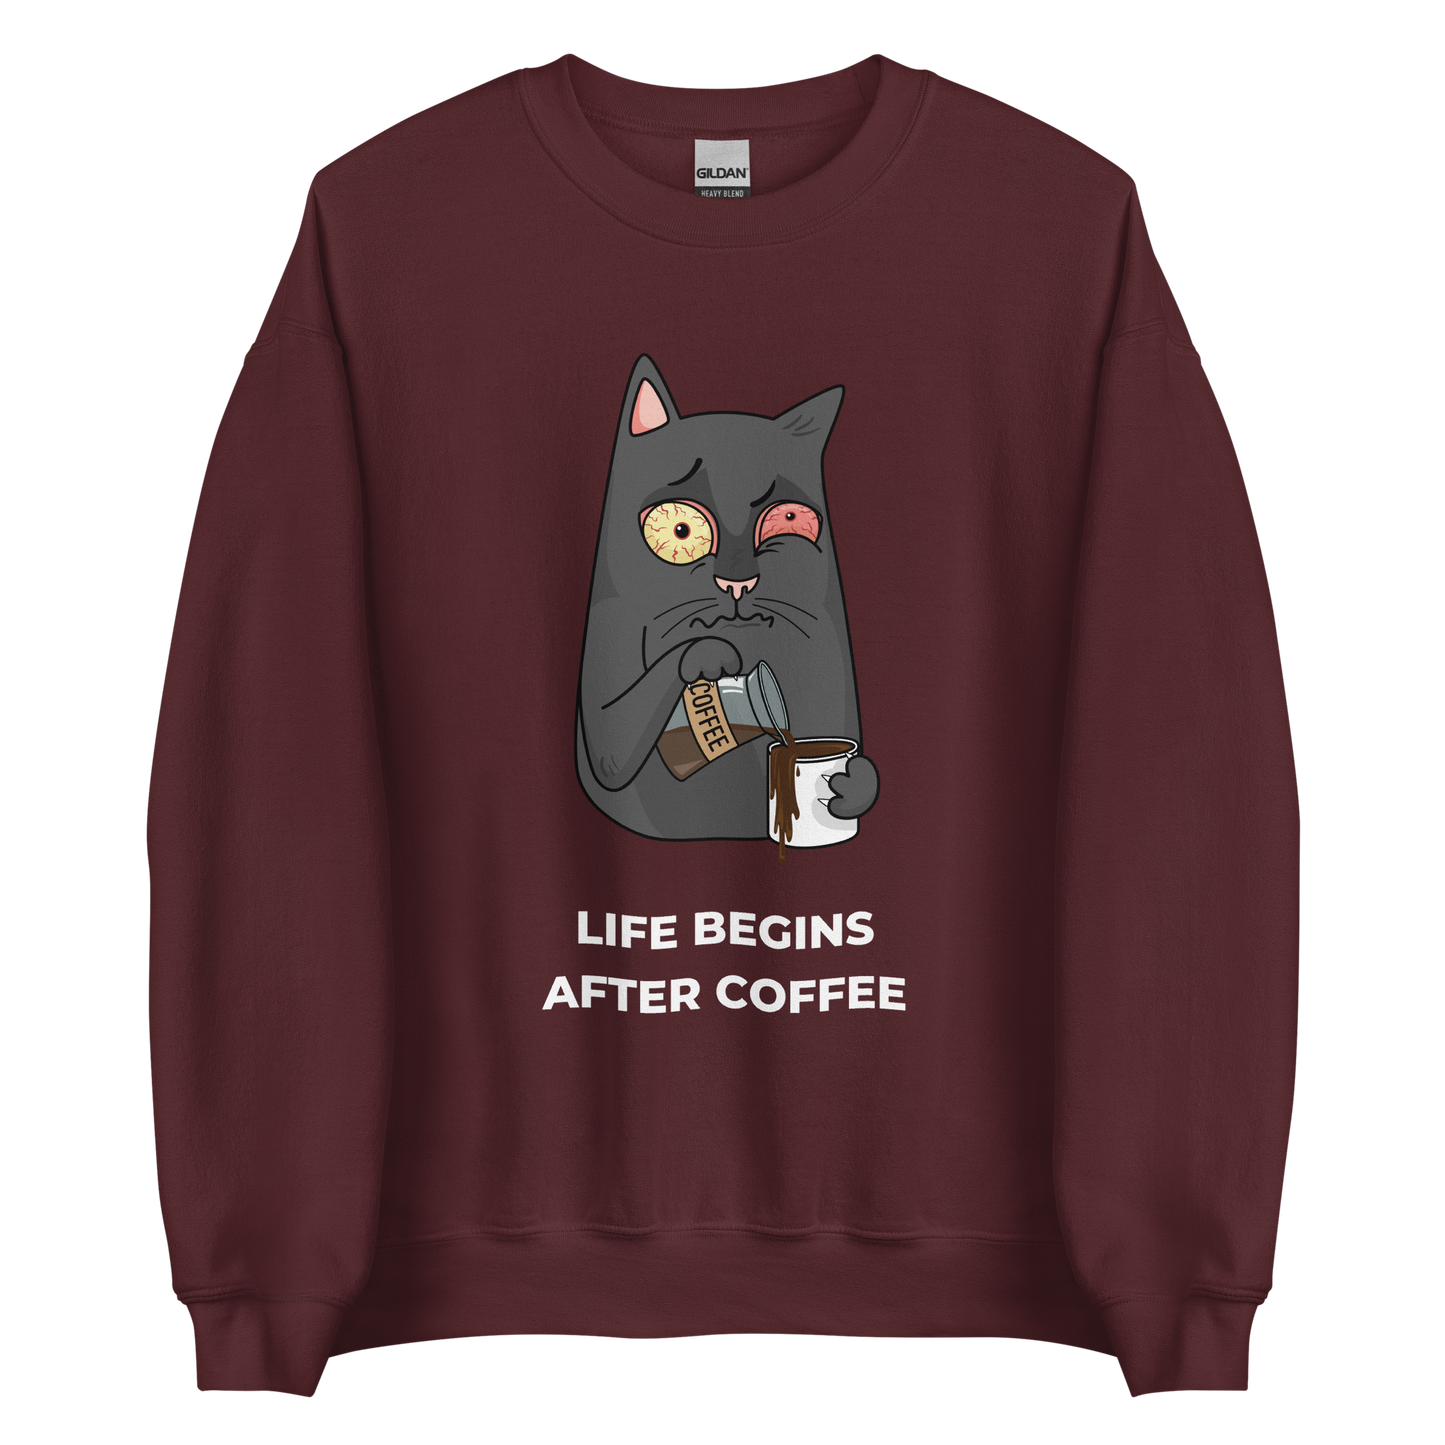 Maroon Cat Sweatshirt featuring a hilarious Life Begins After Coffee graphic on the chest - Funny Graphic Cat Sweatshirts - Boozy Fox